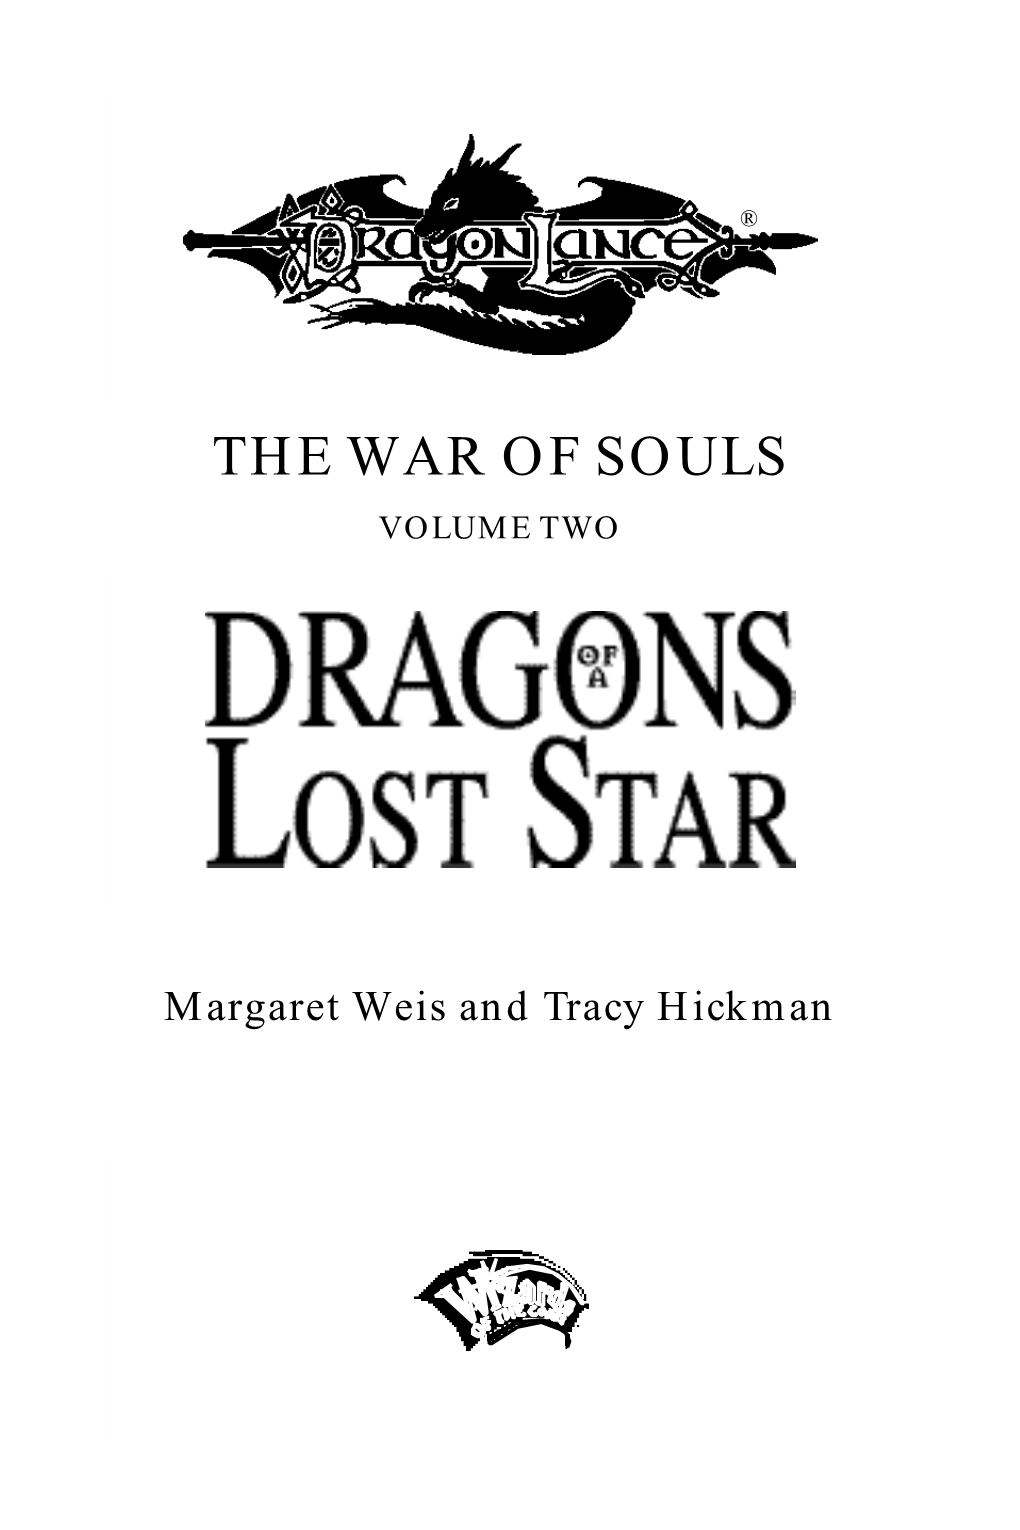 The War of Souls Volume Two